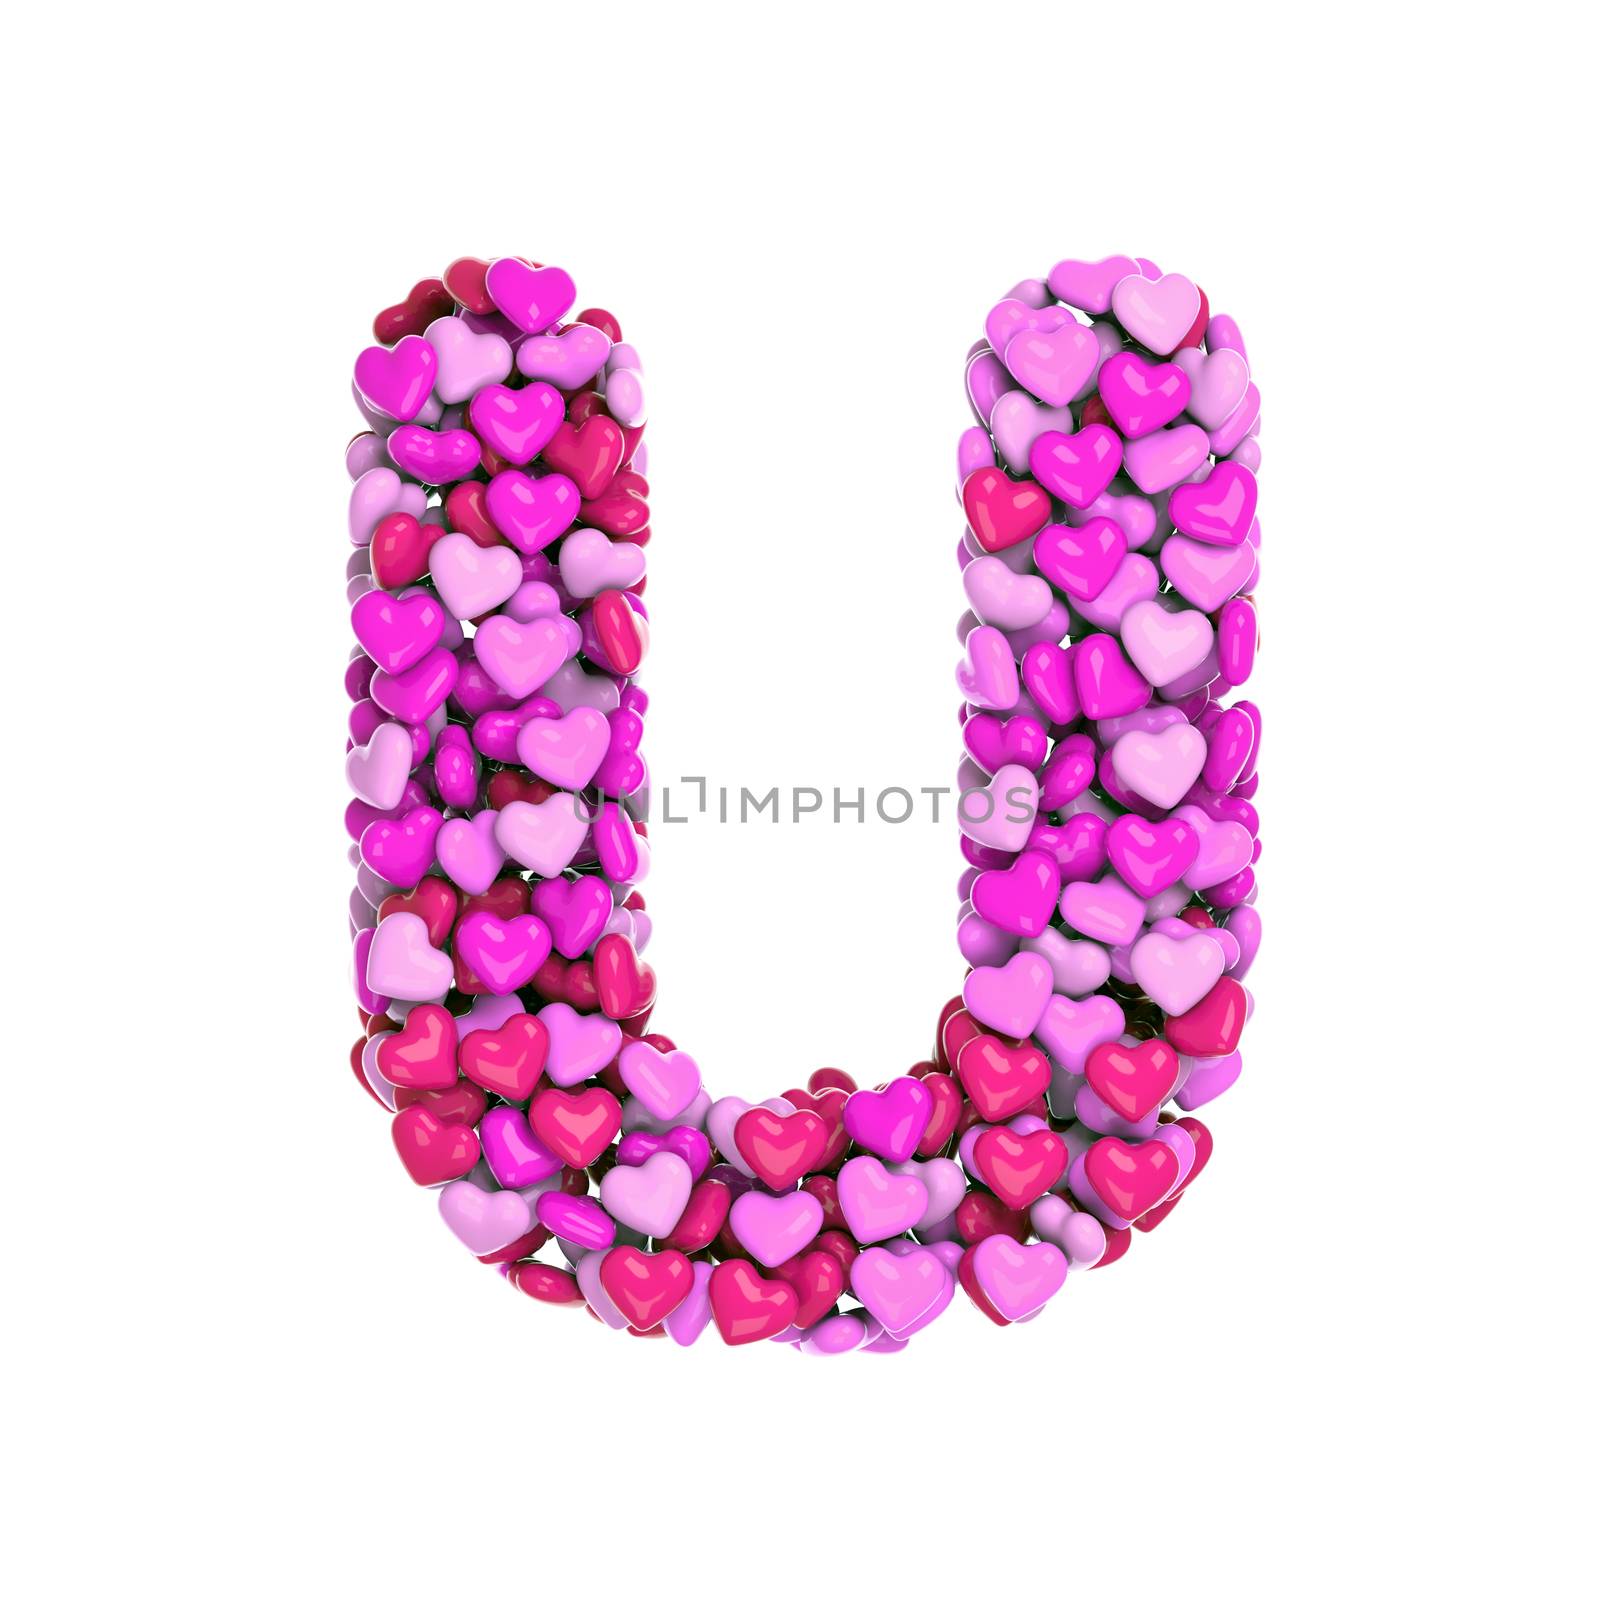 Valentine letter U - Upper-case 3d pink hearts font isolated on white background. This alphabet is perfect for creative illustrations related but not limited to Love, passion, wedding...